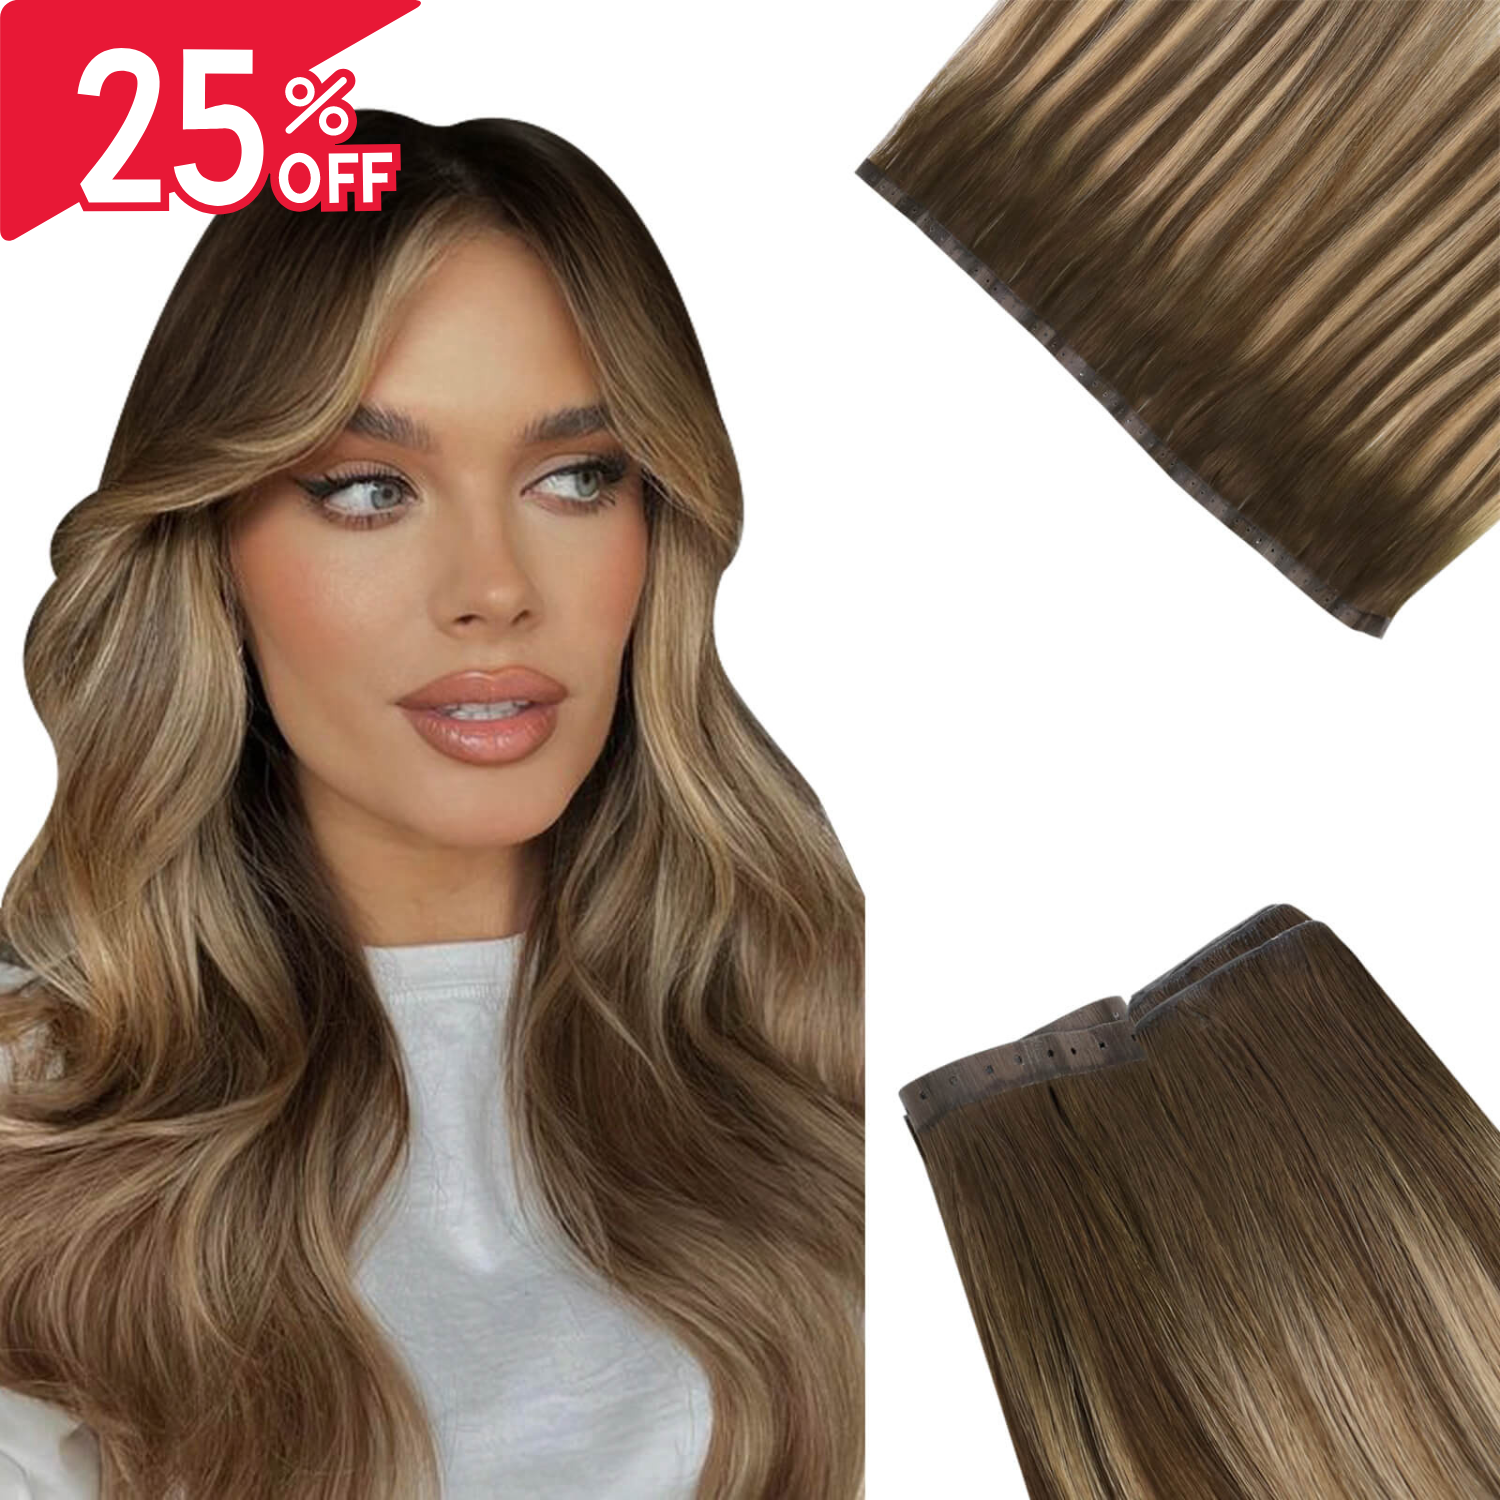 weft hair extensions,hair wefts,sew in weft hair,invisible weft hair,pu hole invisible weft,XO Invisible weft,XO hair extensions,xo invisible weft extensions,pu wefts hair extensions